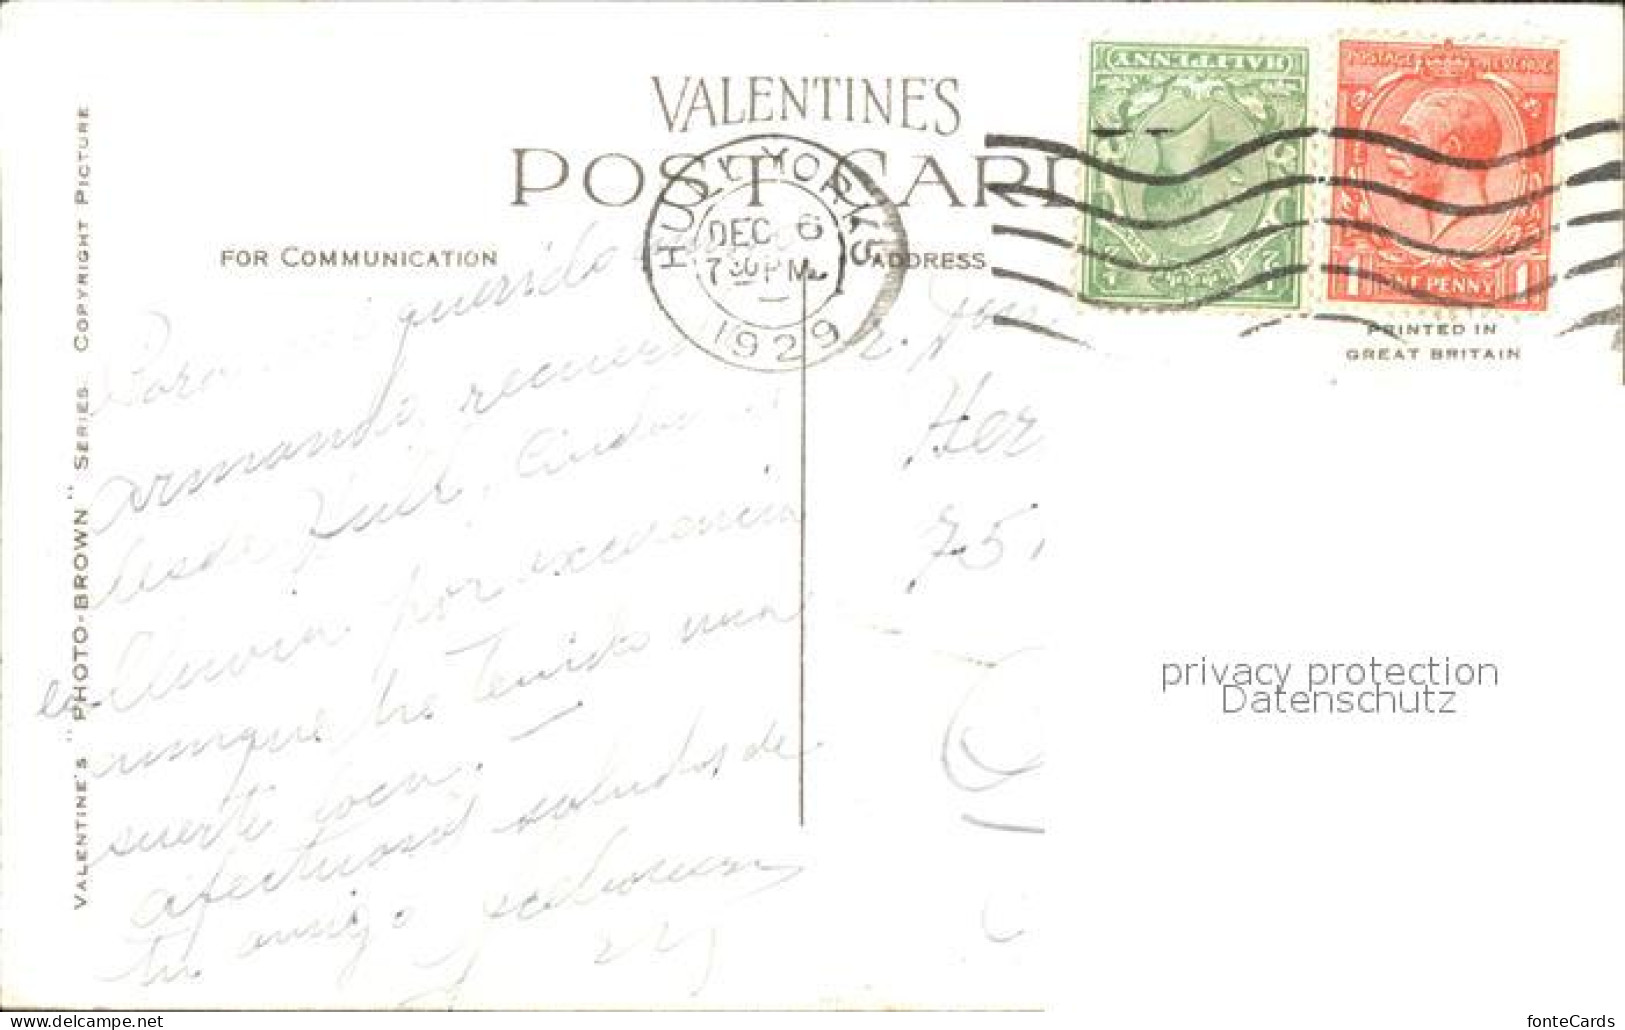 11777331 Hull UK City Hall And Victoria Square Valentine's Post Card York - Other & Unclassified